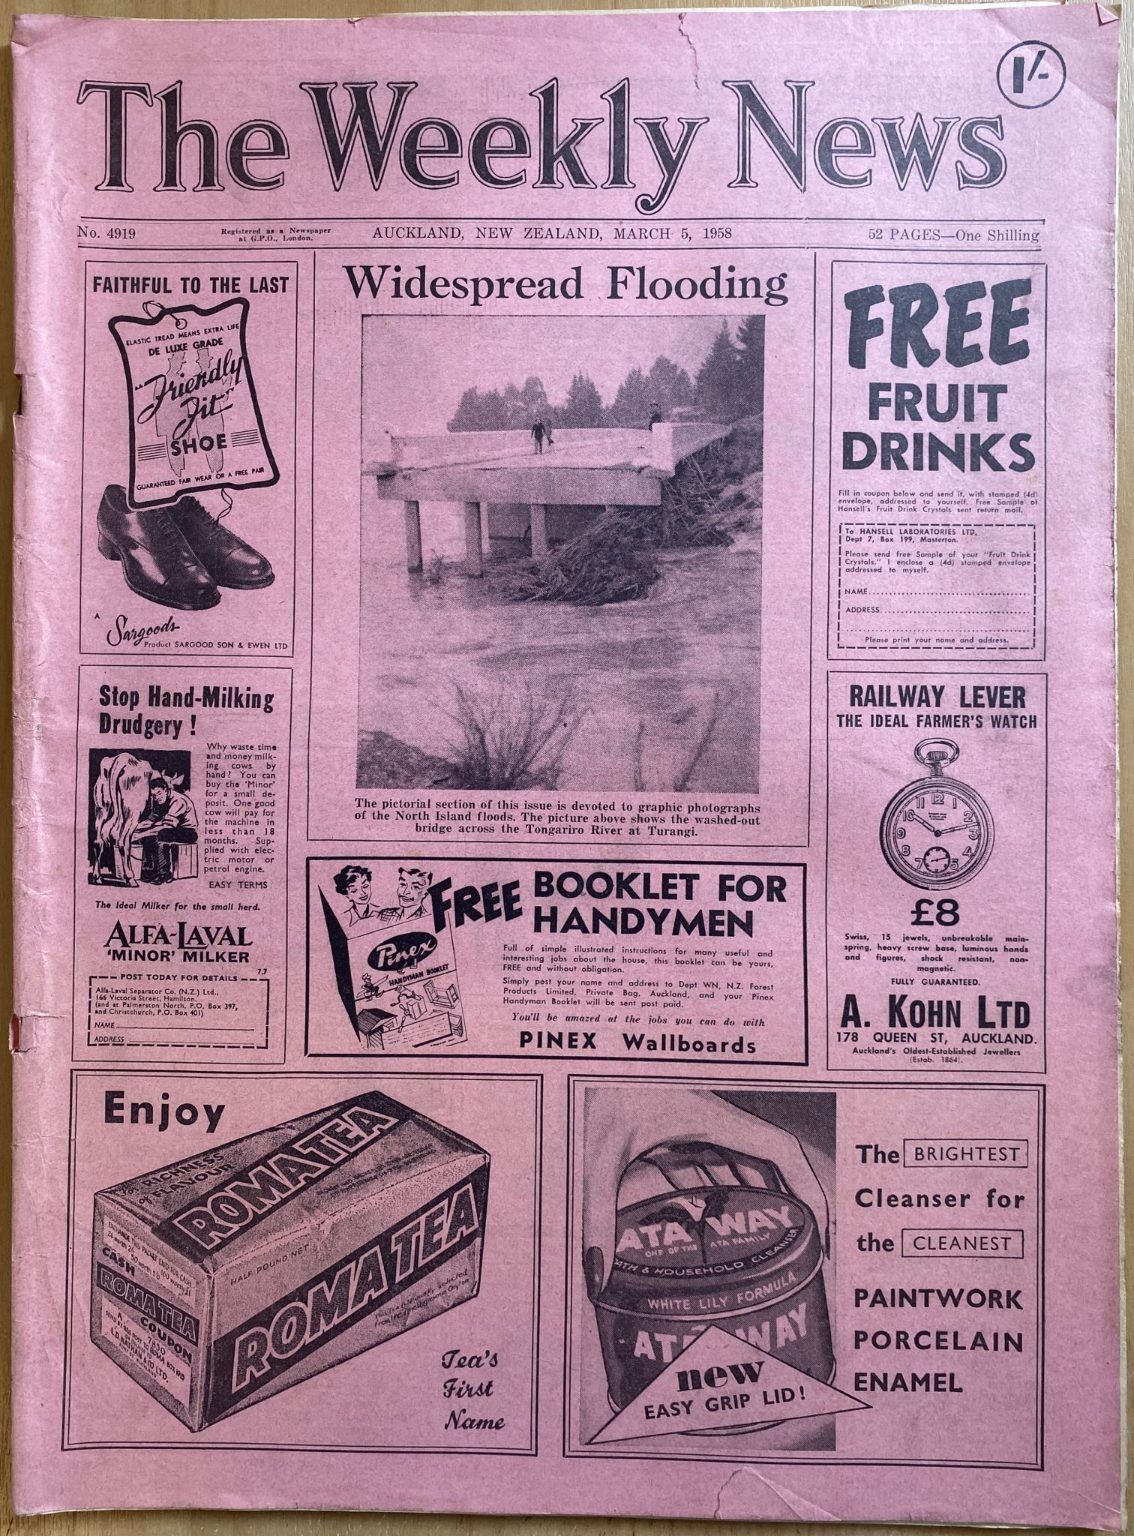 OLD NEWSPAPER: The Weekly News, No. 4919, 5 March 1958